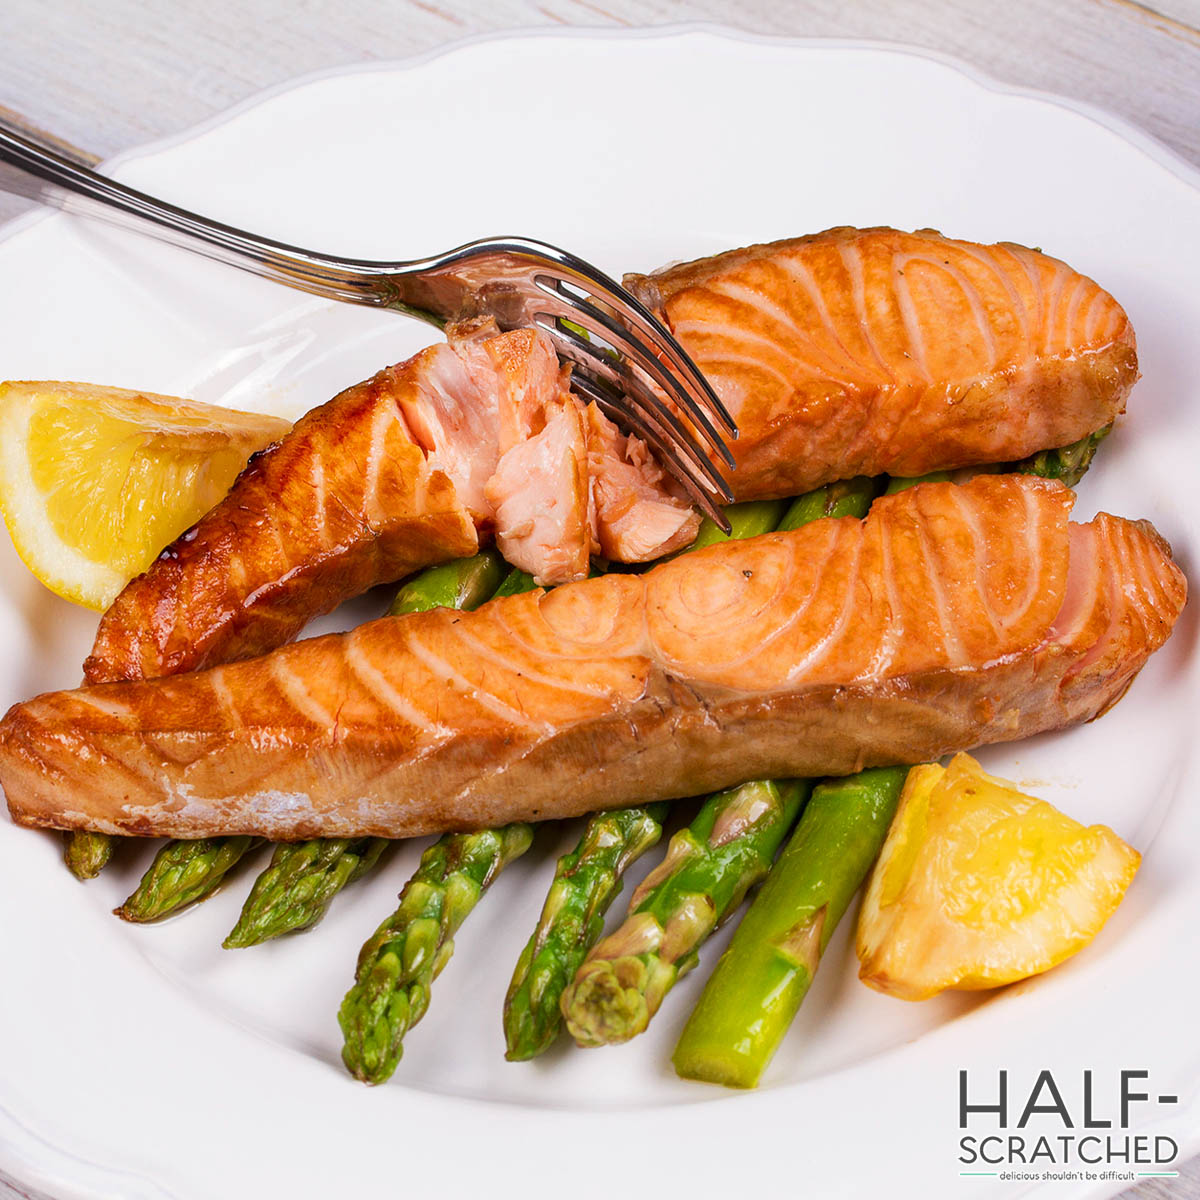 Broiled salmon with asparagus